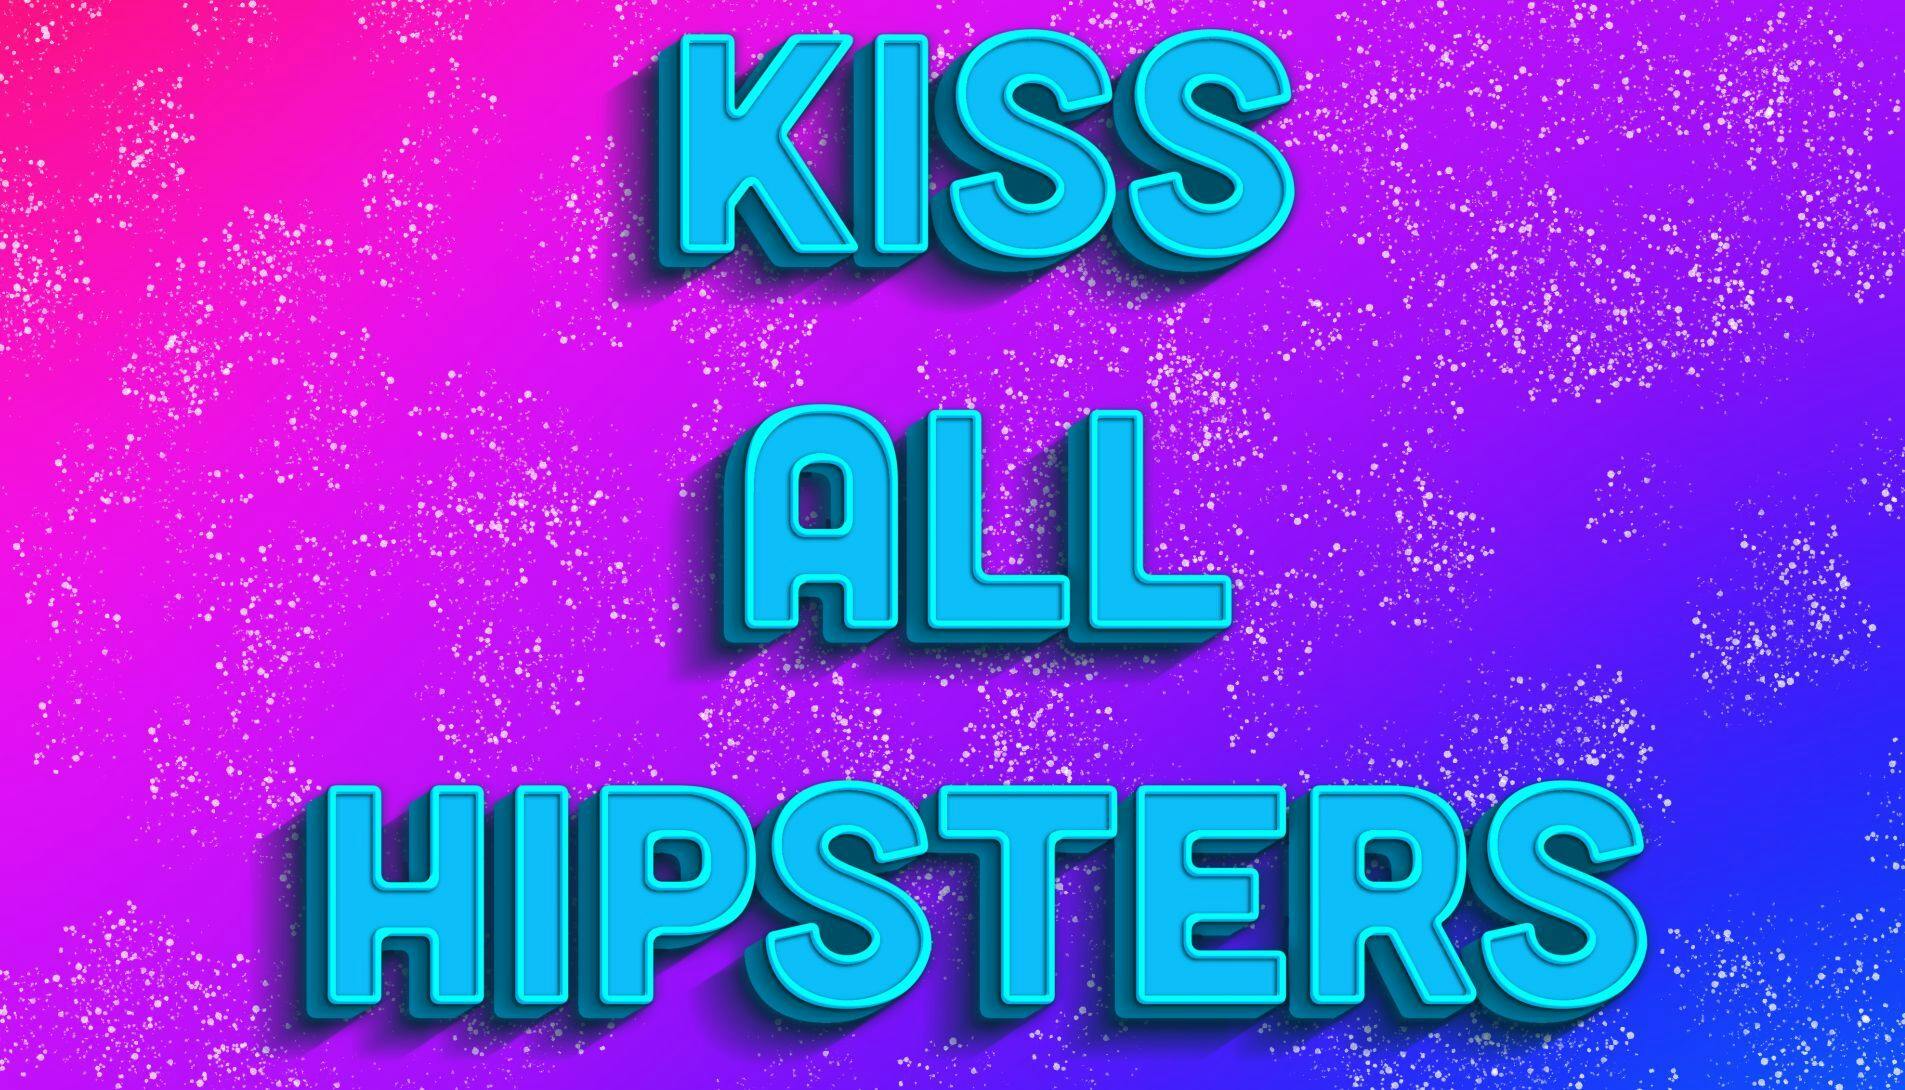 Kiss All Hipsters (Live) - The Mysterines and C.O.F.F.I.N